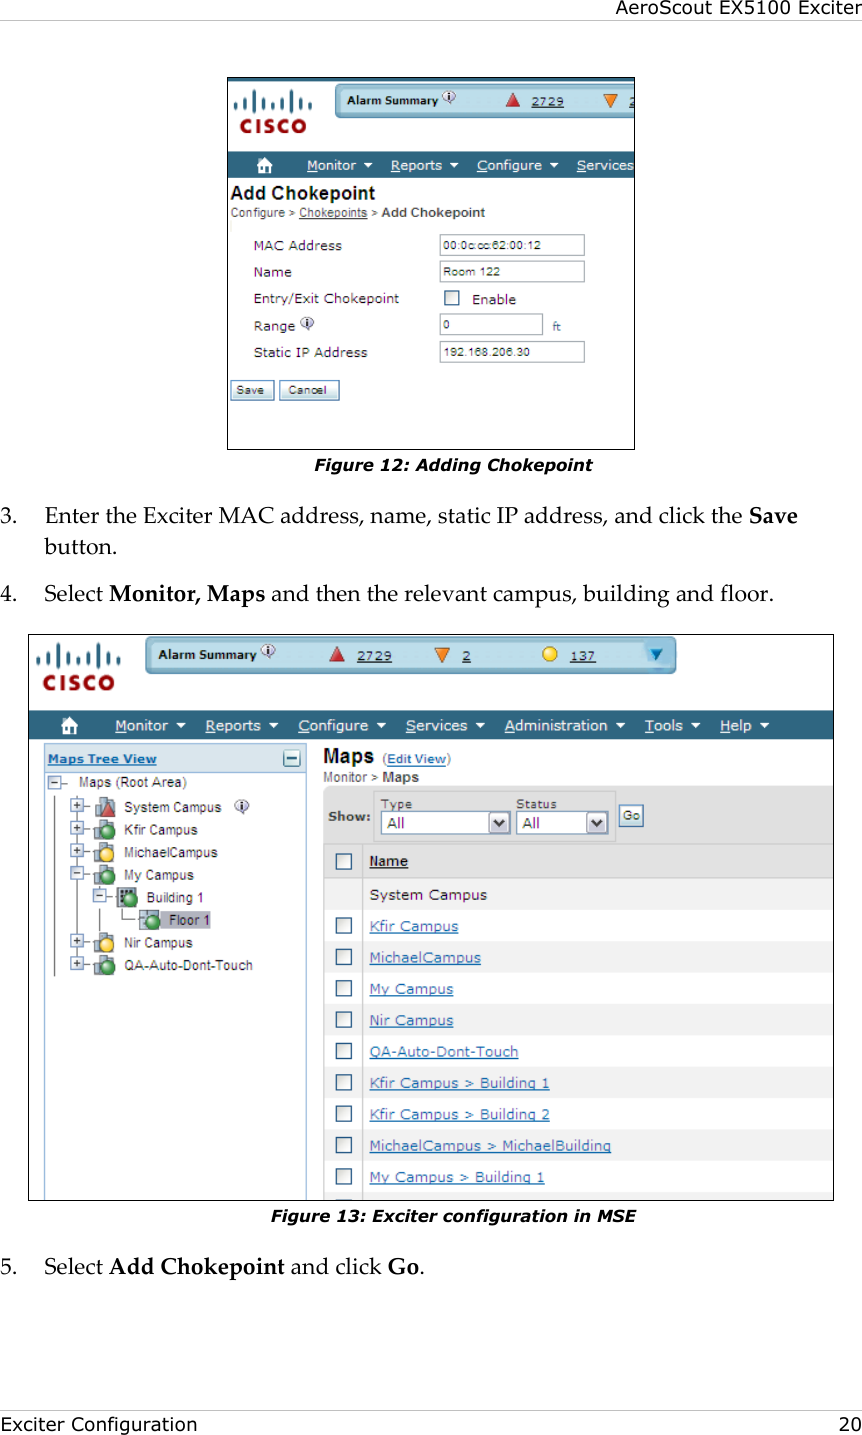 AeroScout EX5100 Exciter  Exciter Configuration    20  Figure 12: Adding Chokepoint 3. Enter the Exciter MAC address, name, static IP address, and click the Save button. 4. Select Monitor, Maps and then the relevant campus, building and floor.  Figure 13: Exciter configuration in MSE 5. Select Add Chokepoint and click Go. 